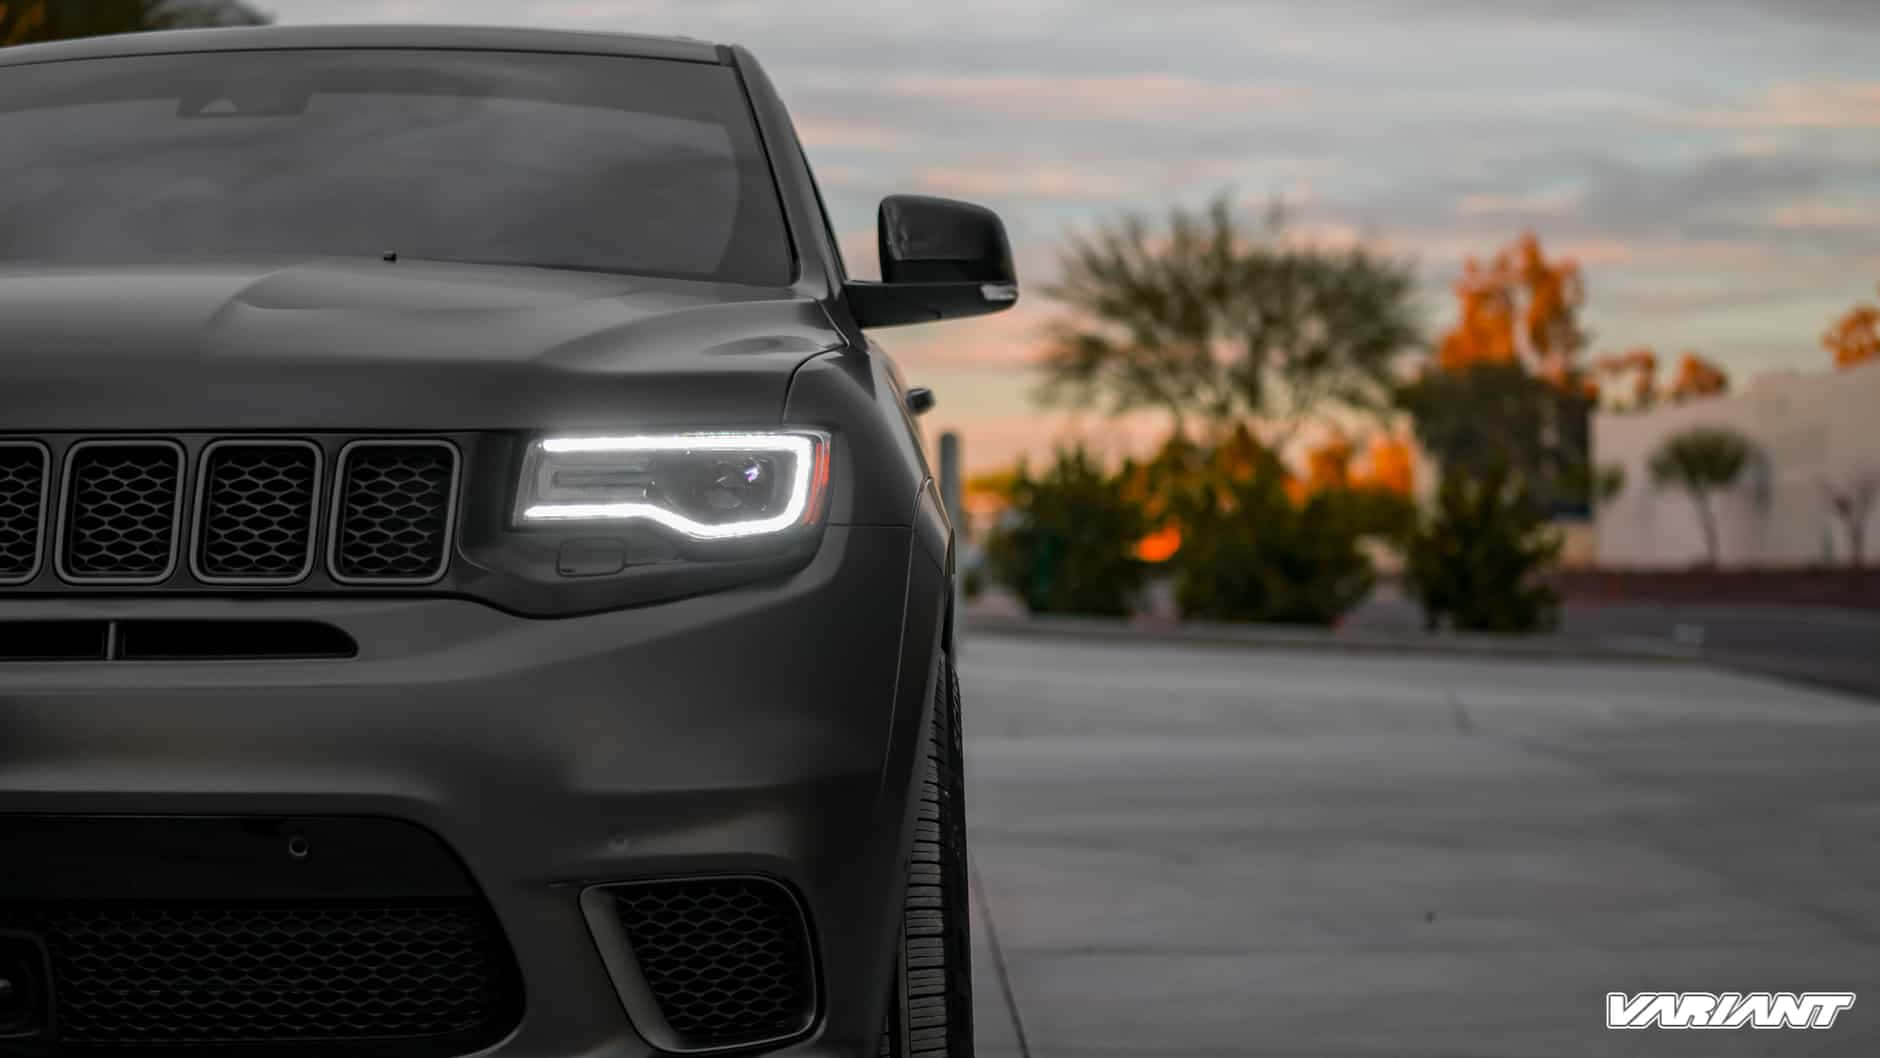 The Front End Of A Black Jeep Grand Cherokee Wallpaper